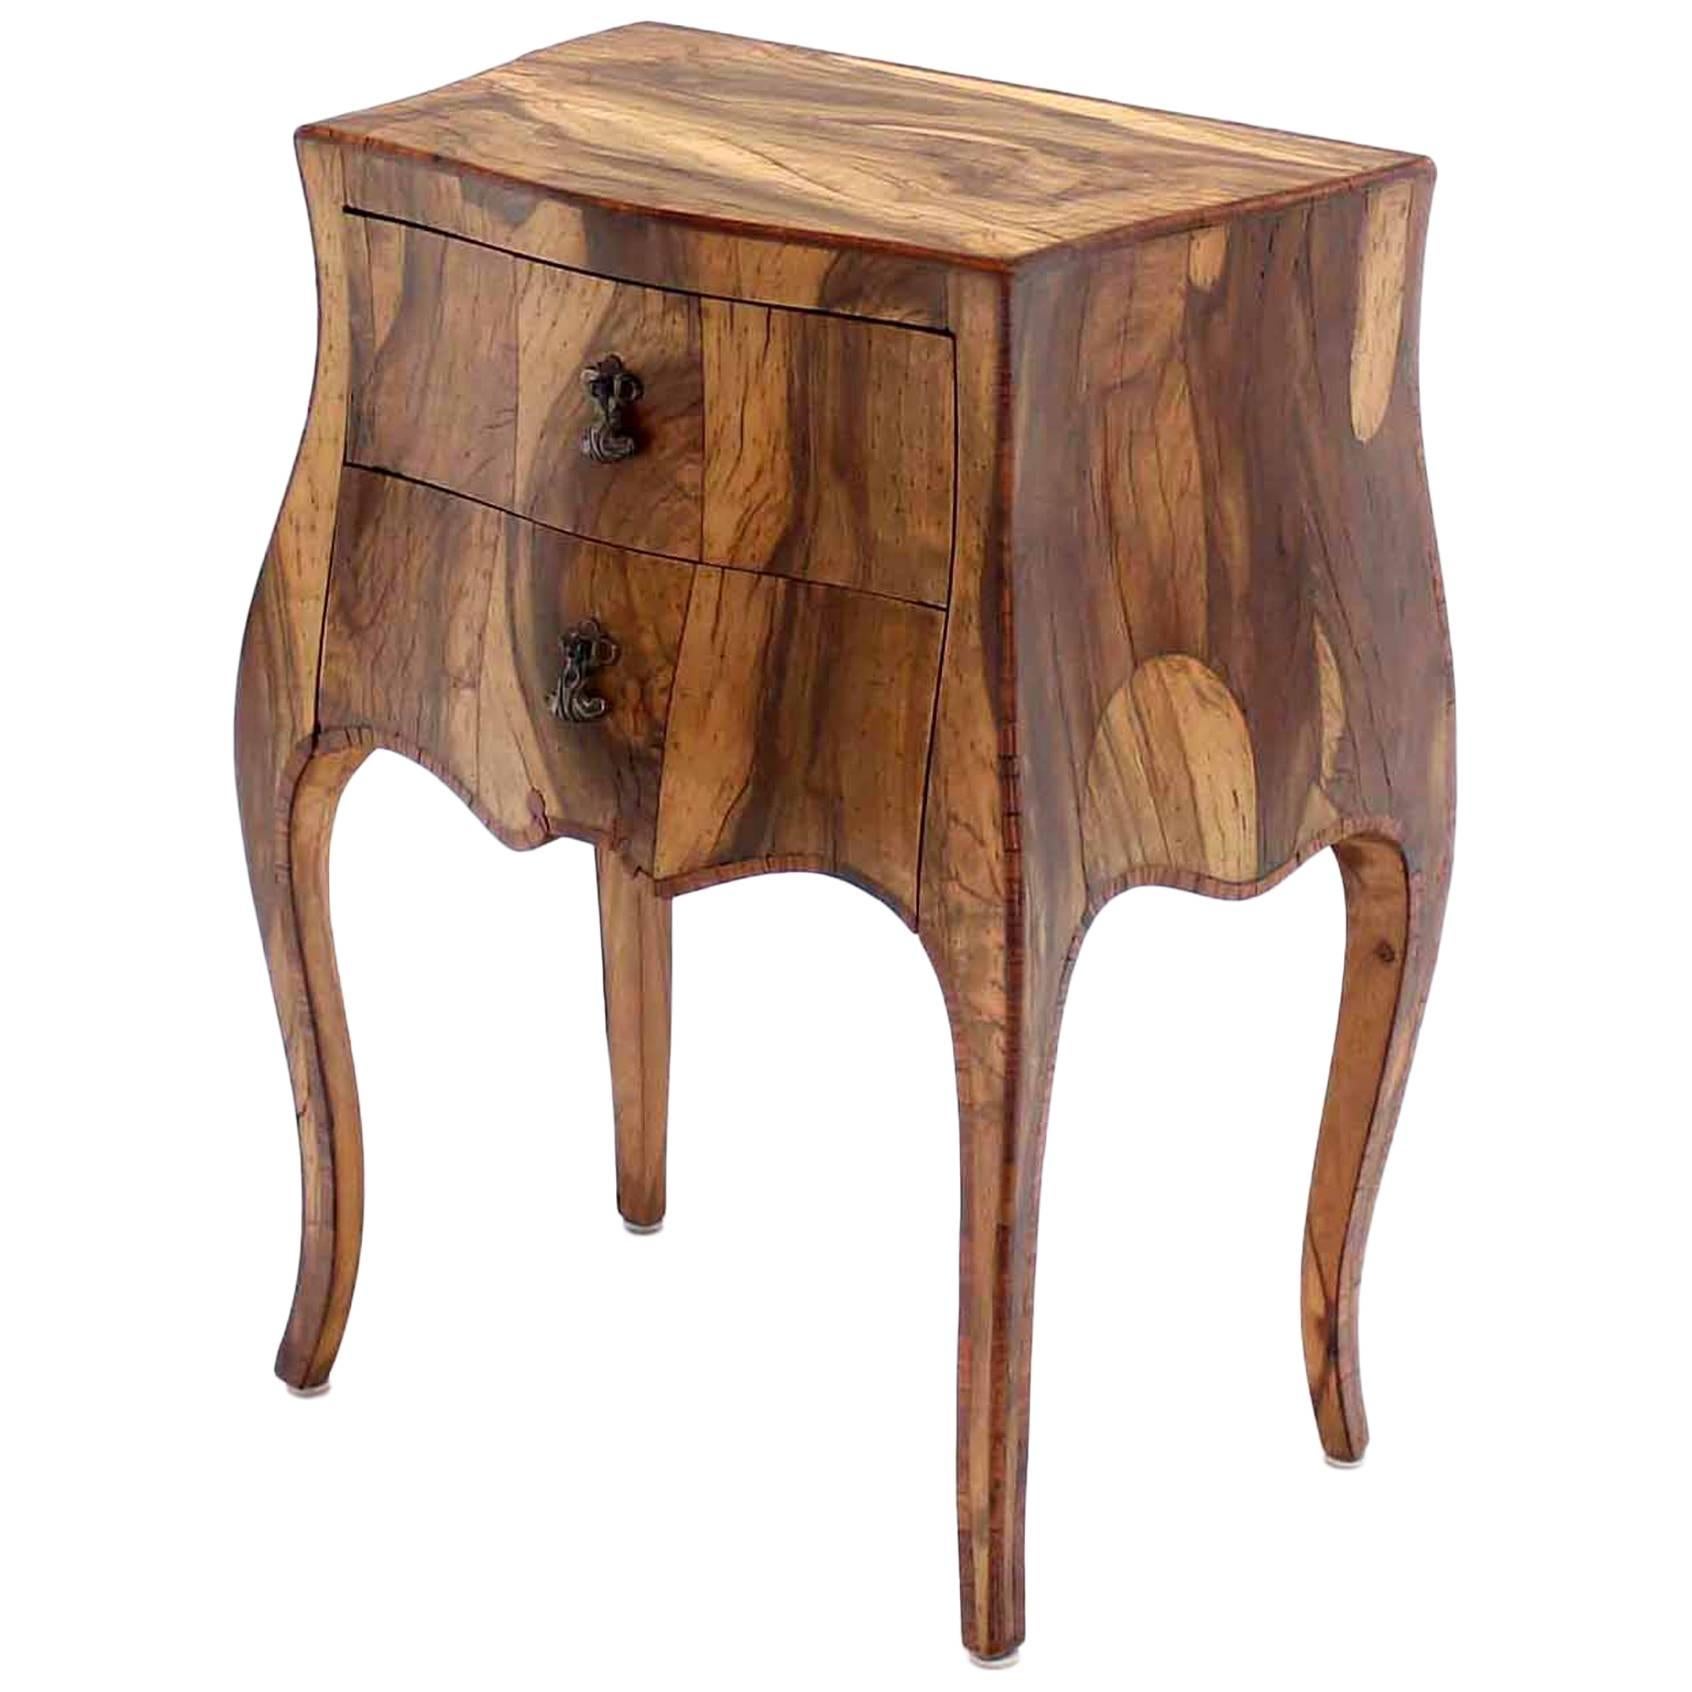 Patched Burl Wood Italian Bombay Side Table Nightstand